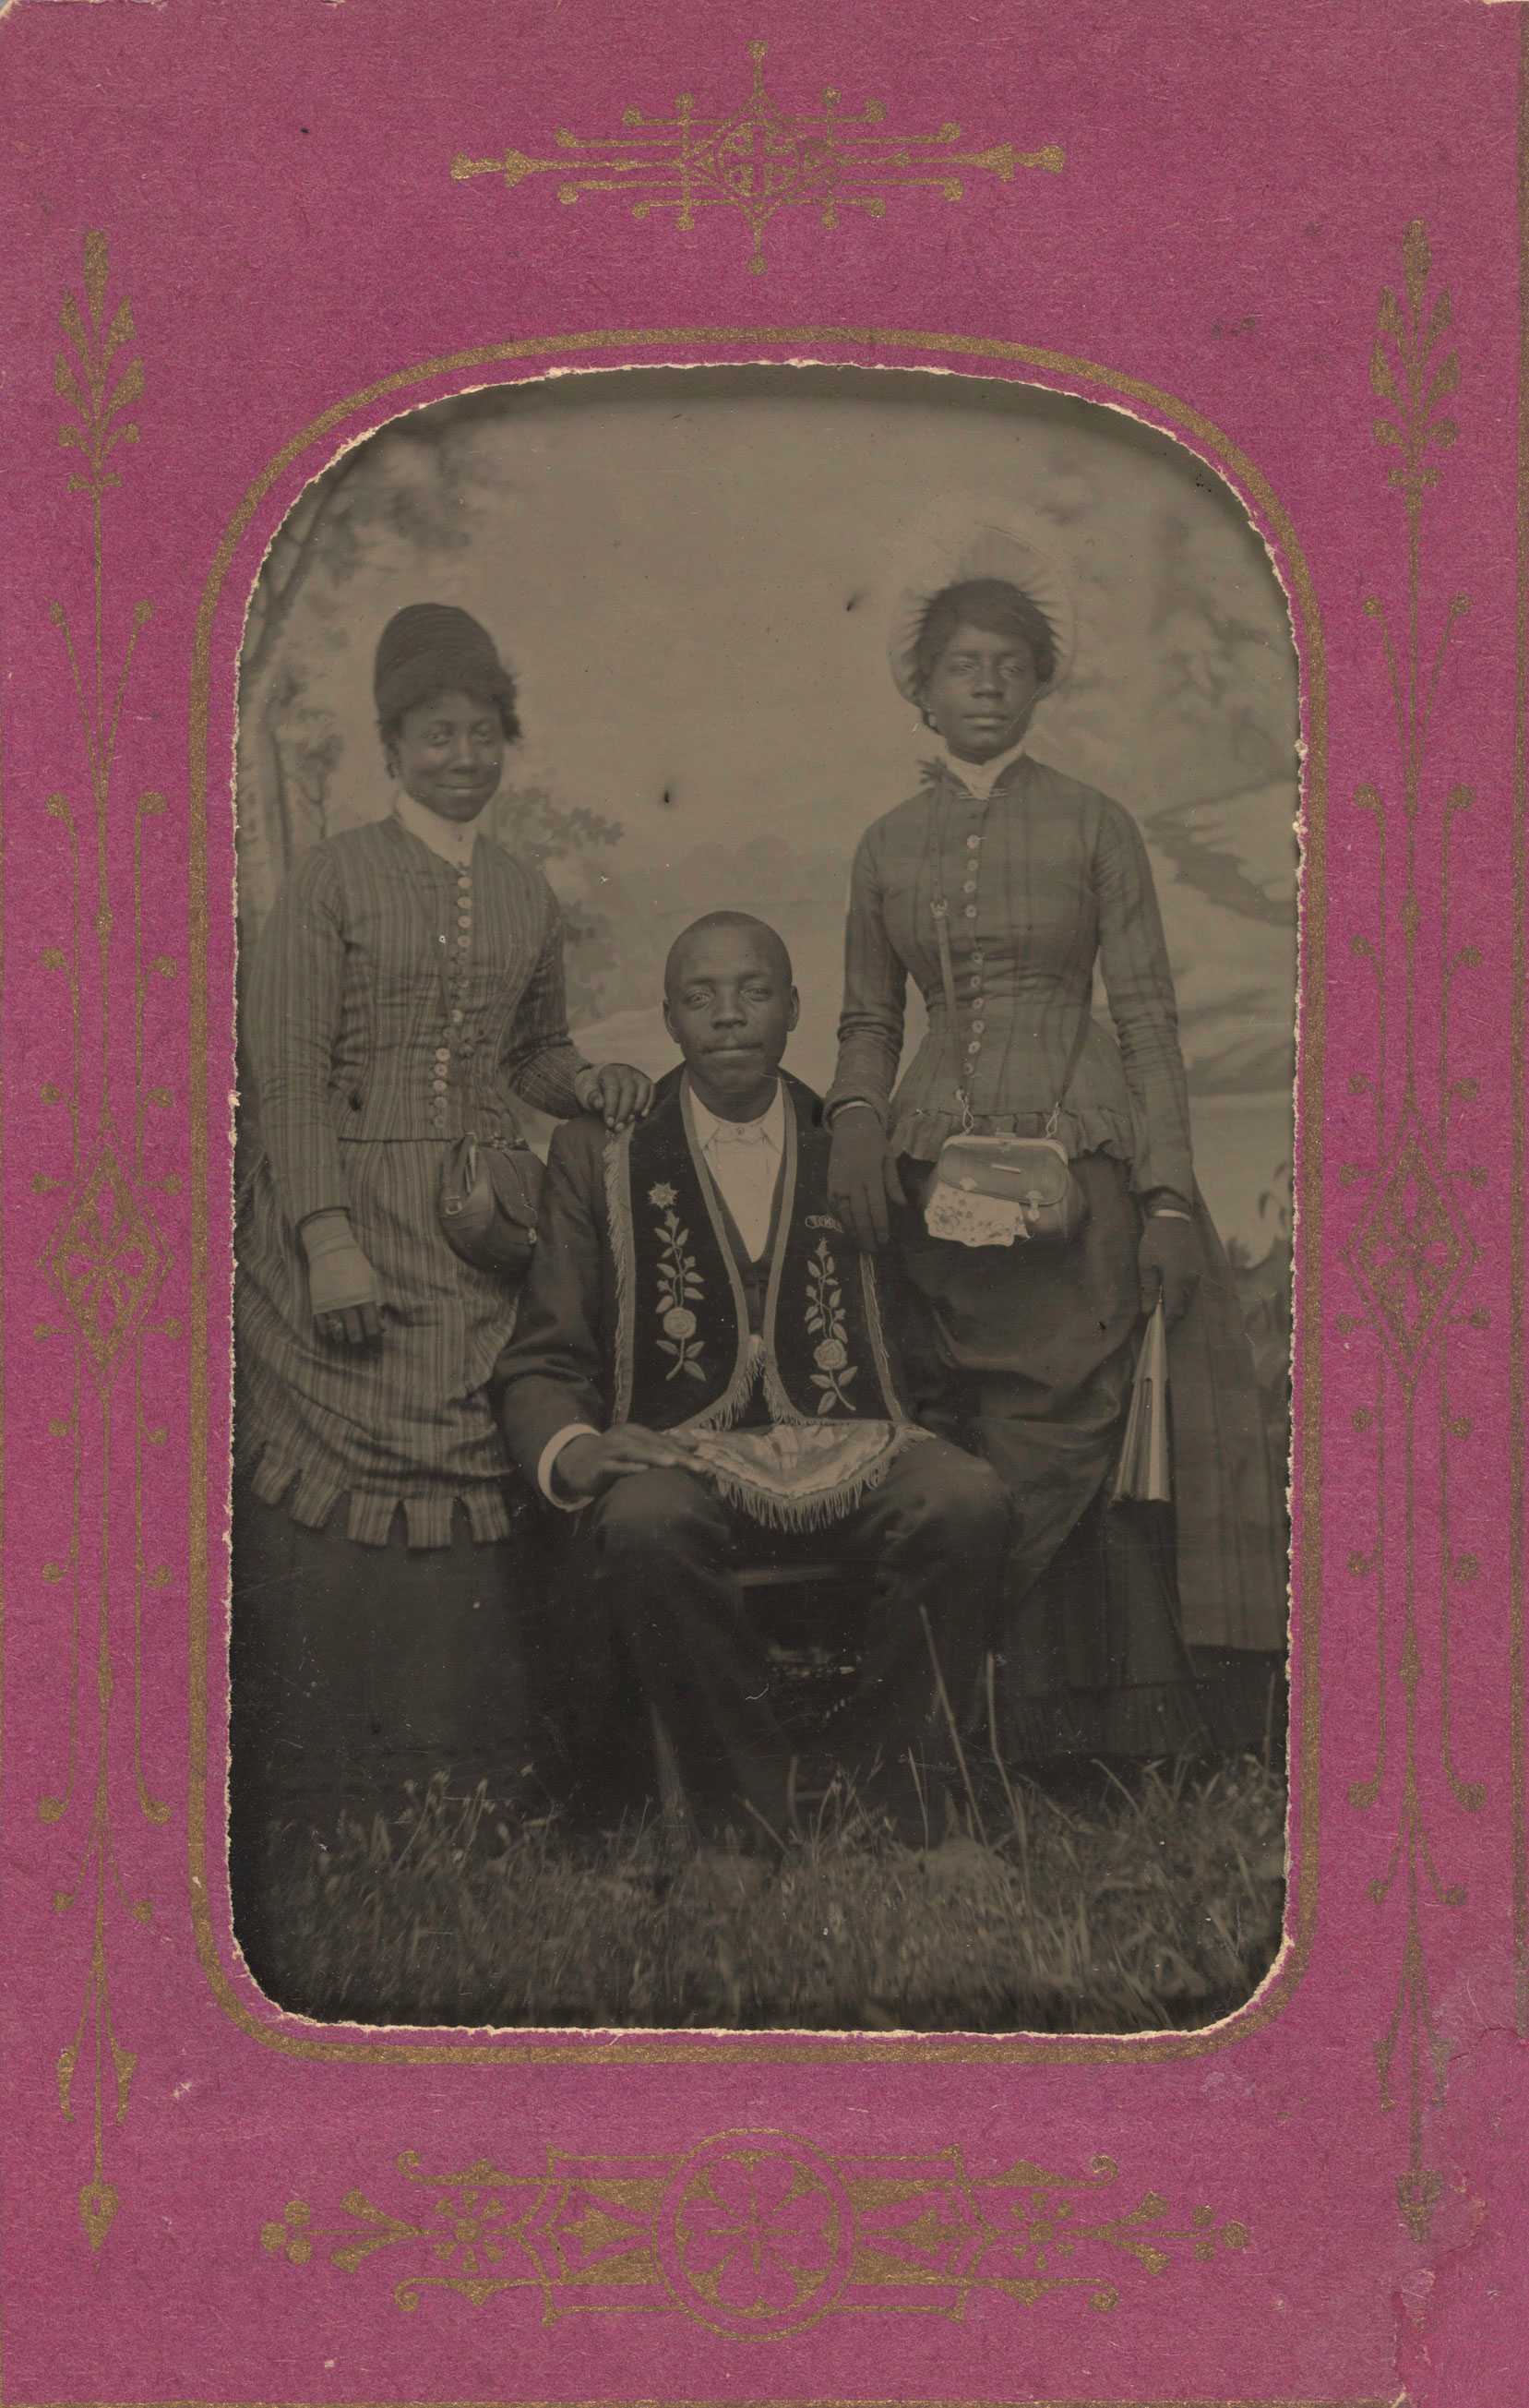 A tintype of two women standing next to a sitting man in a pink decorative frame.